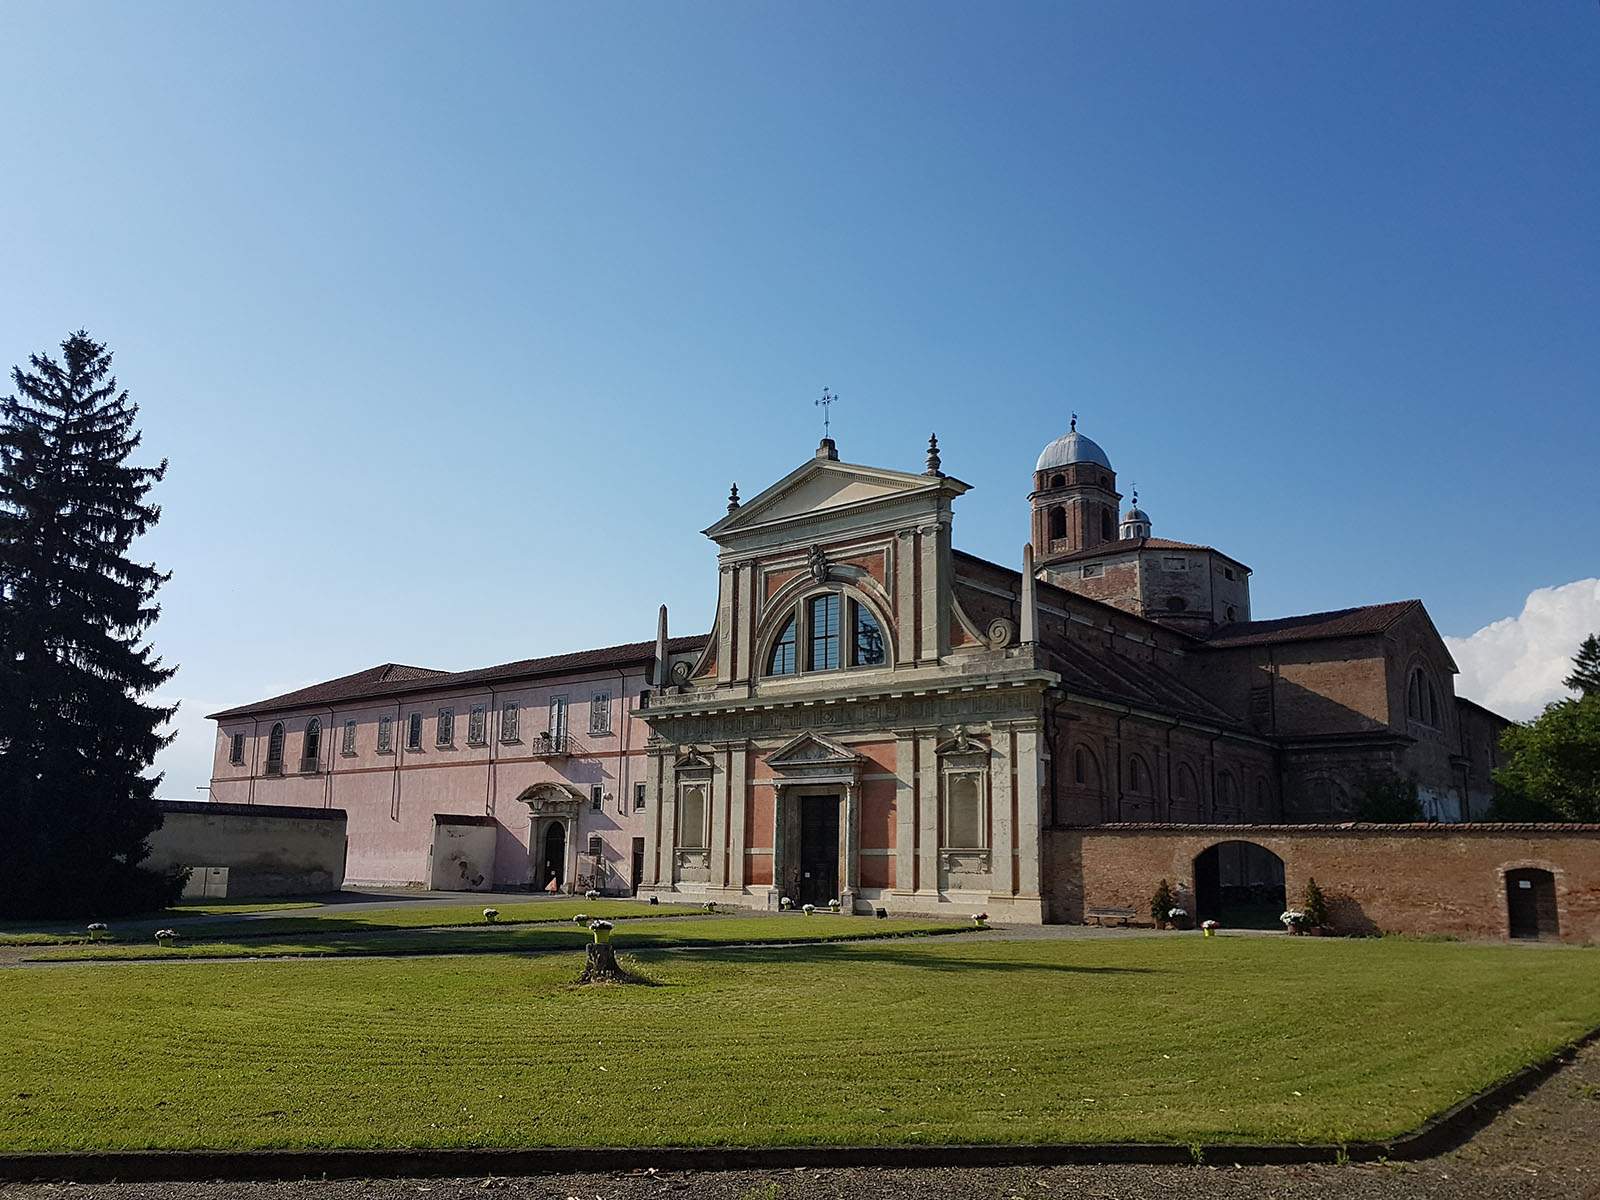 Alexandria, a new layout for Santa Croce and restorations for Vasari's masterpieces